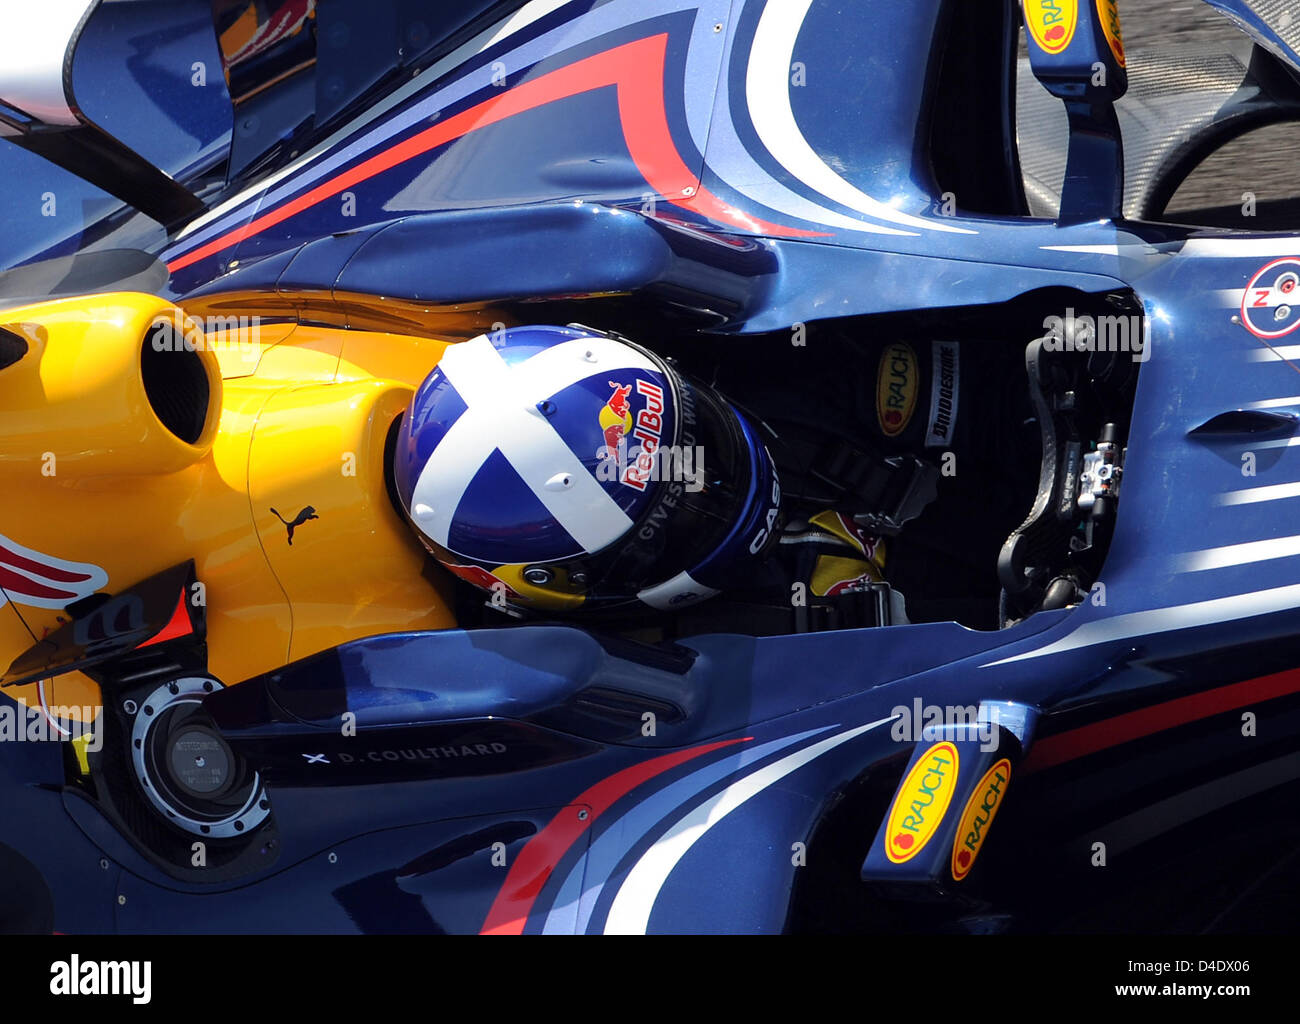 Scottish Formula One driver David Coulthard of Red Bull Racing steers his car trough the pit lane during the first practice session at Circuit de Catalunya in Montmelo near Barcelona, Spain, 25 April 2008. Photo: GERO BRELOER Stock Photo